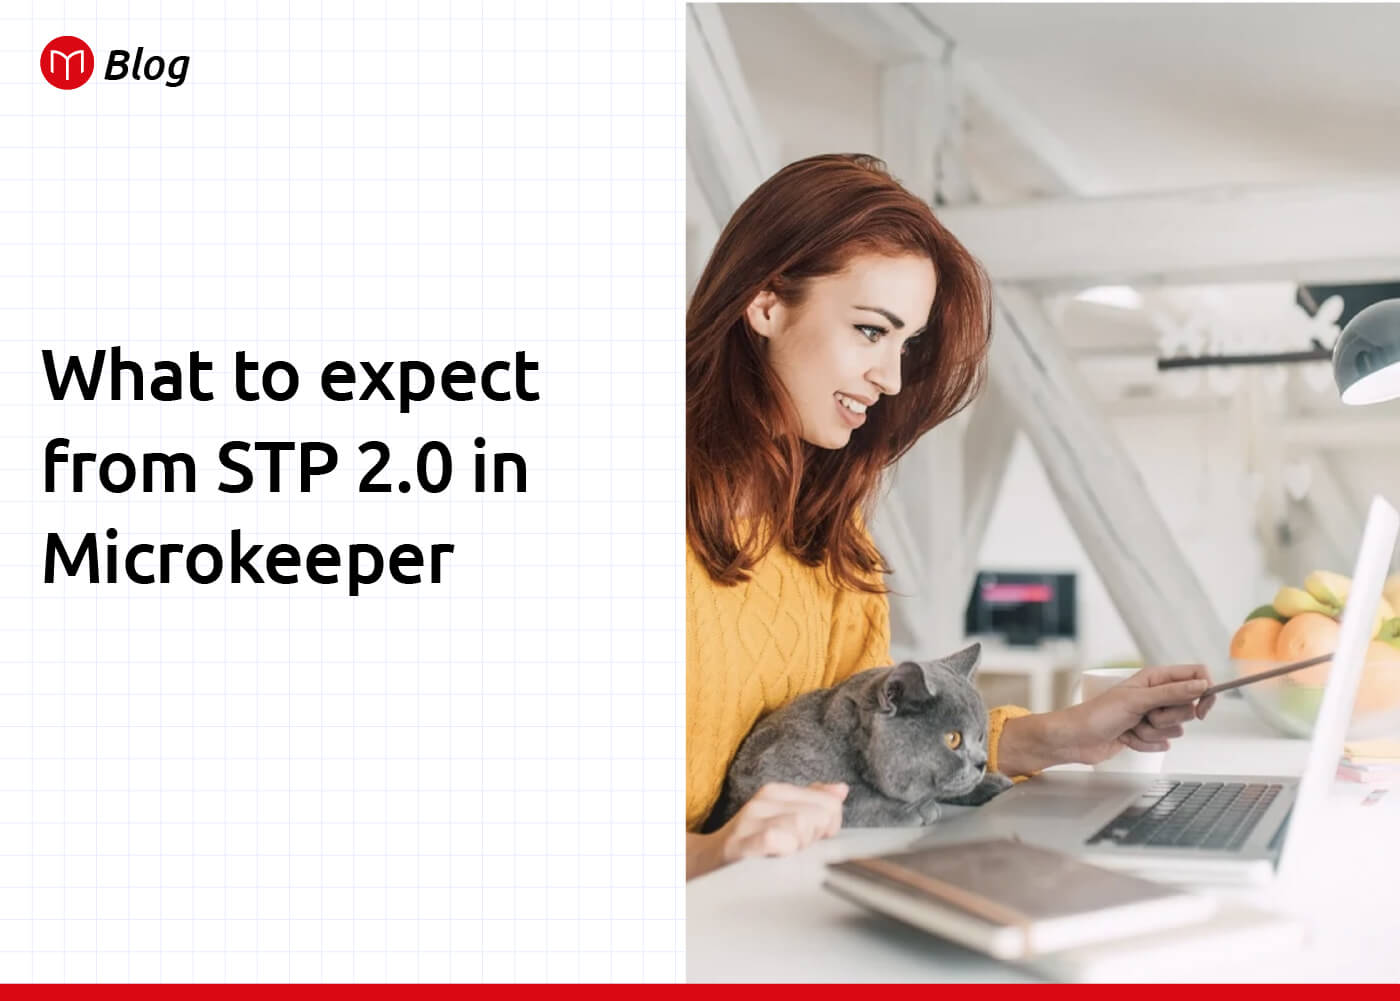 What to expect from STP 2.0 in Microkeeper